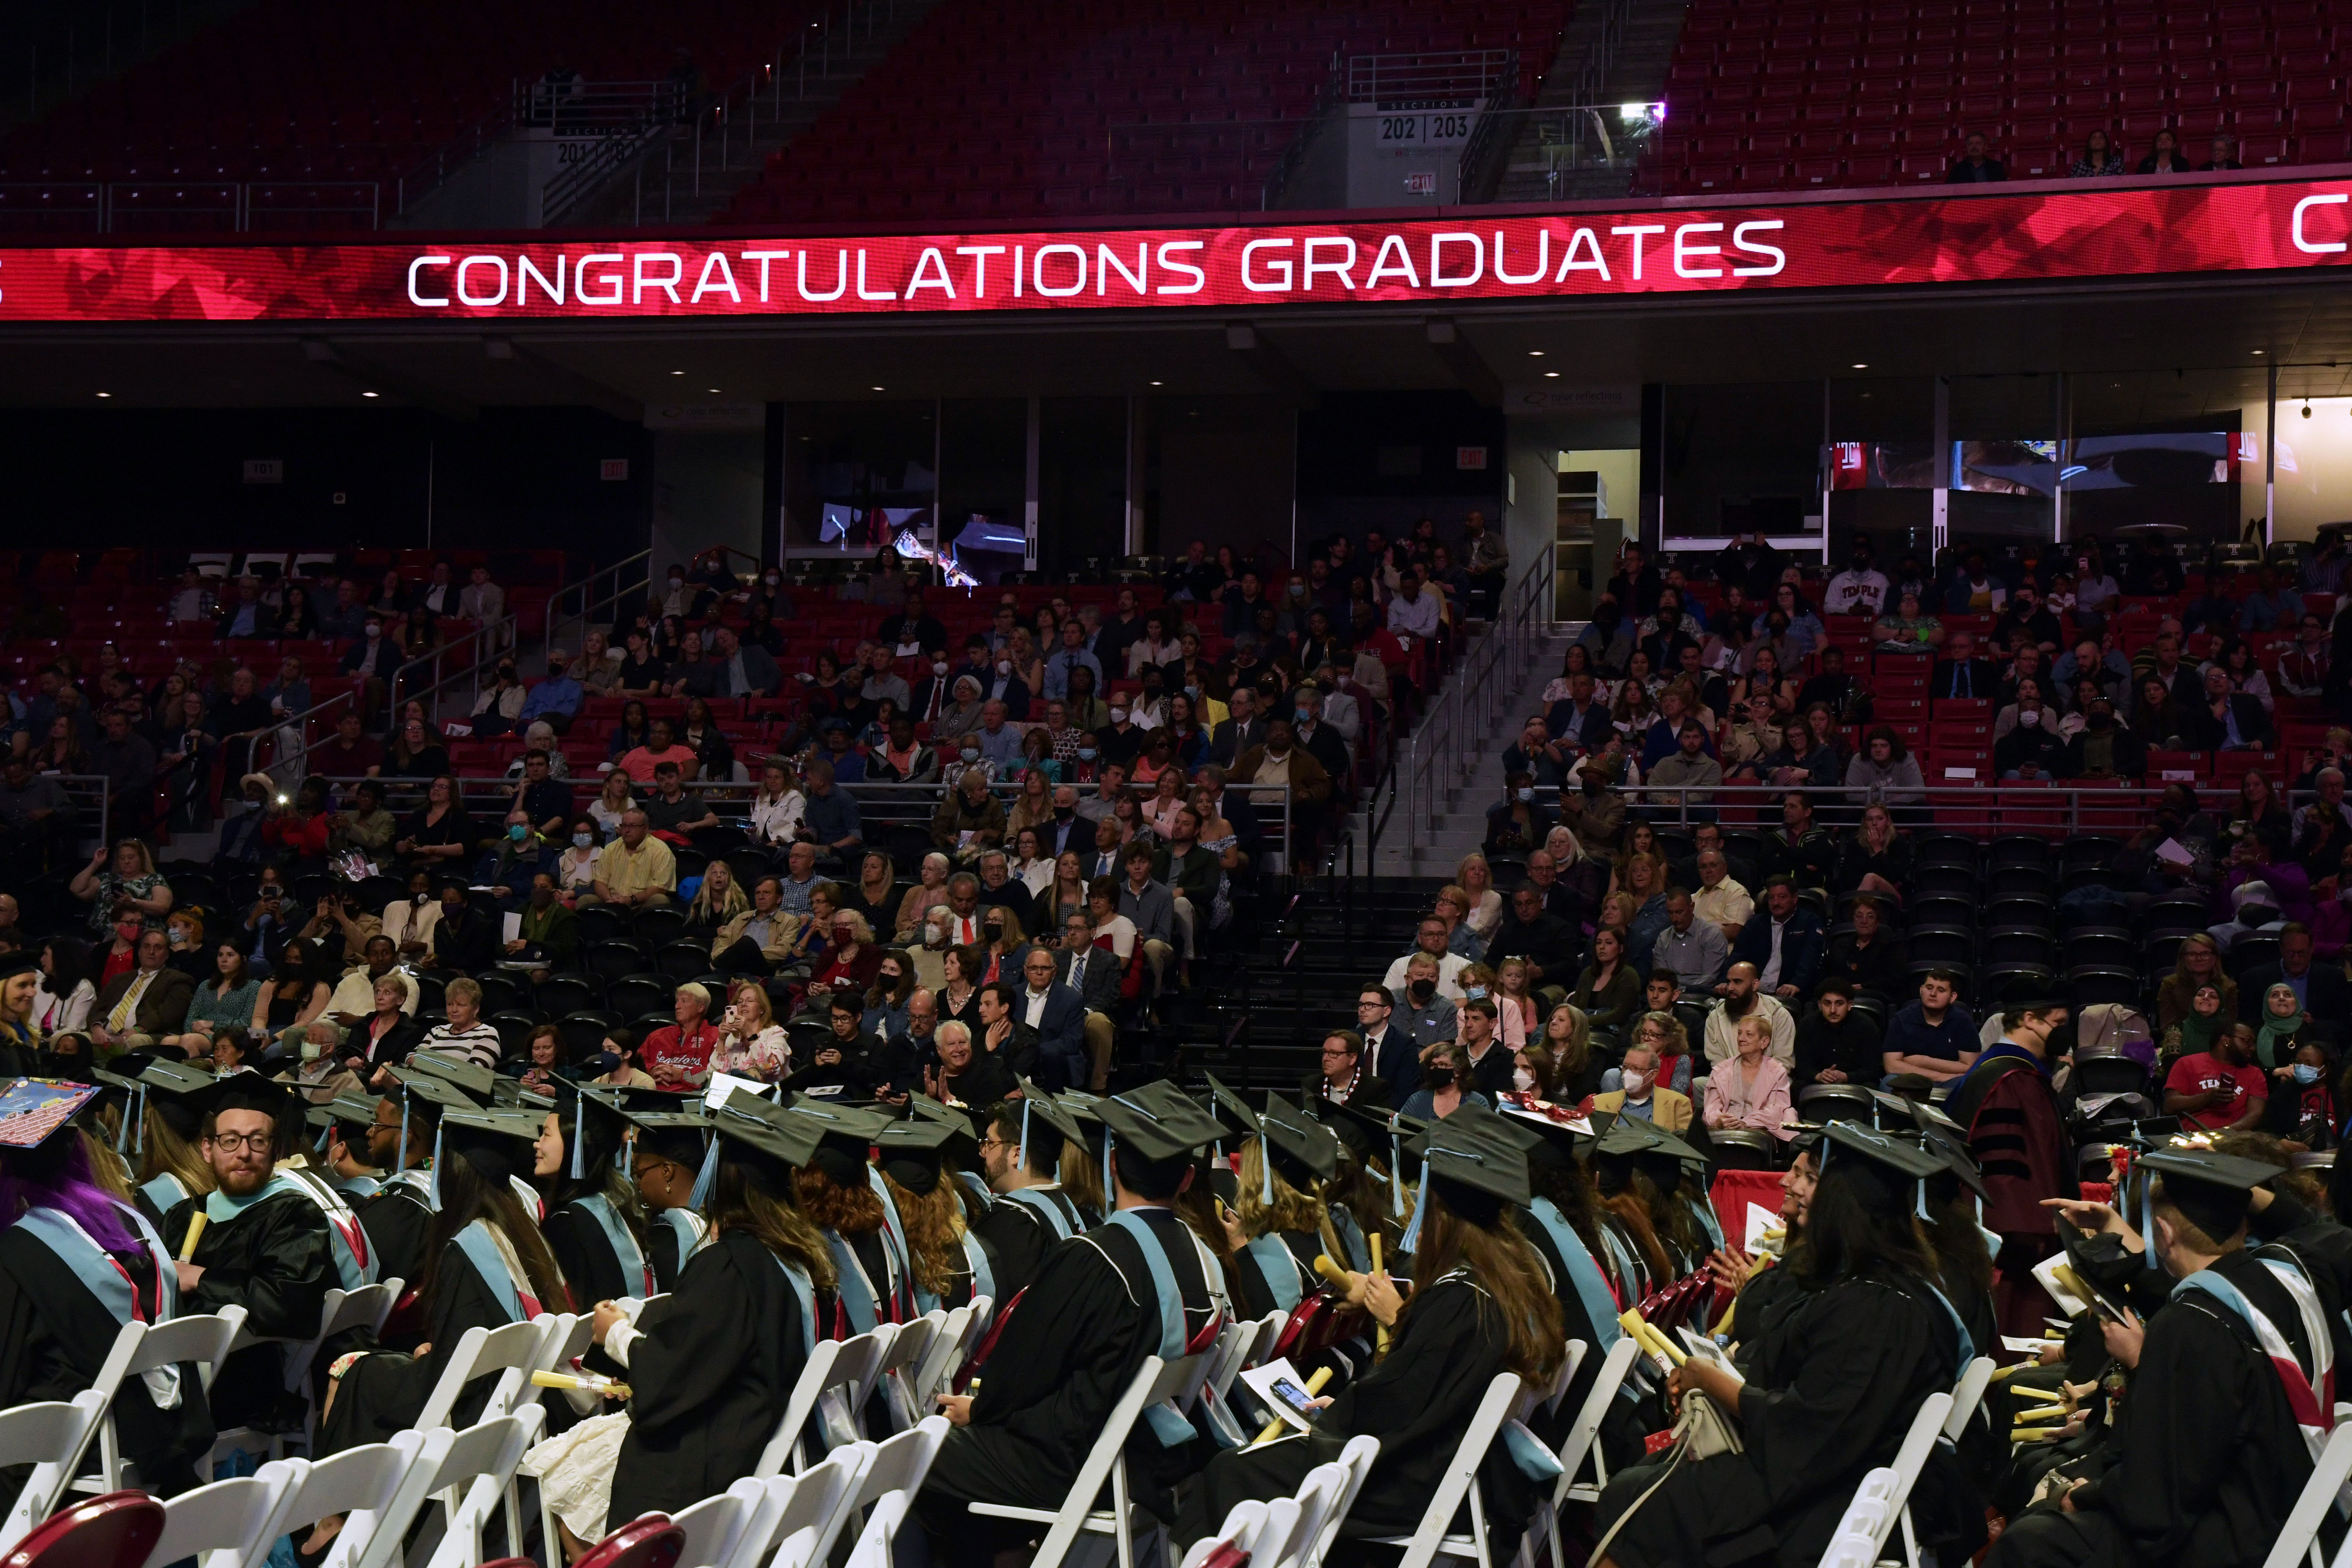 graduates in seats with electronic signage that reads "congratulations graduates"